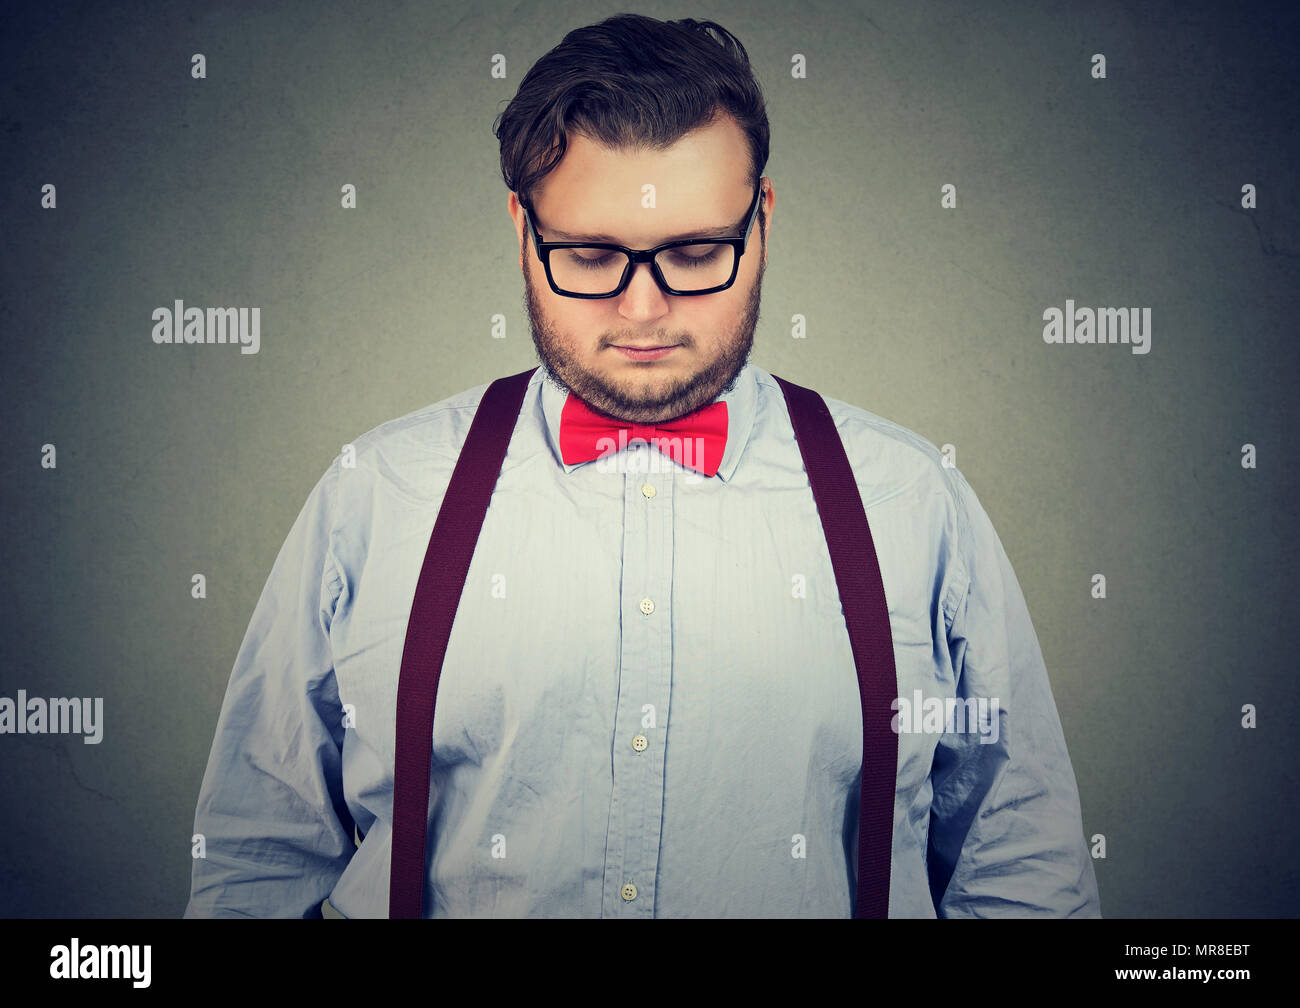 1365 Chubby Man Glasses Images, Stock Photos & Vectors